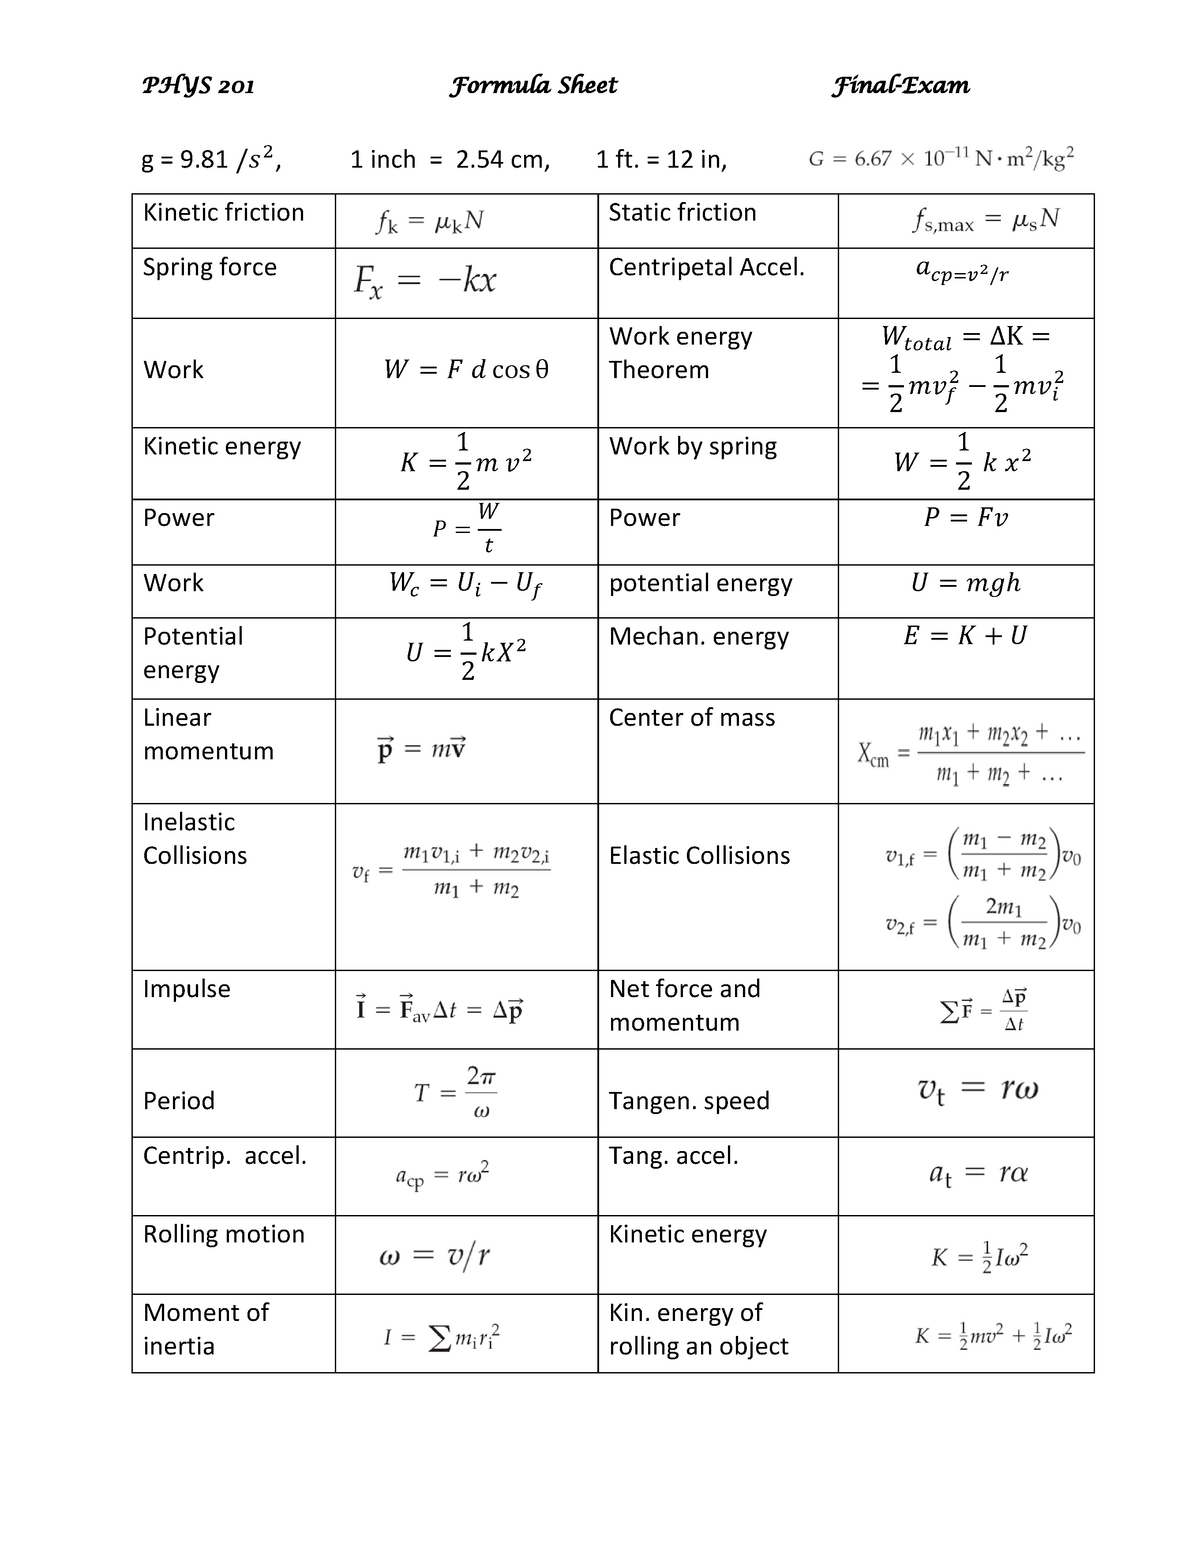 General Physics Formula Sheet All In One Photos - Photos